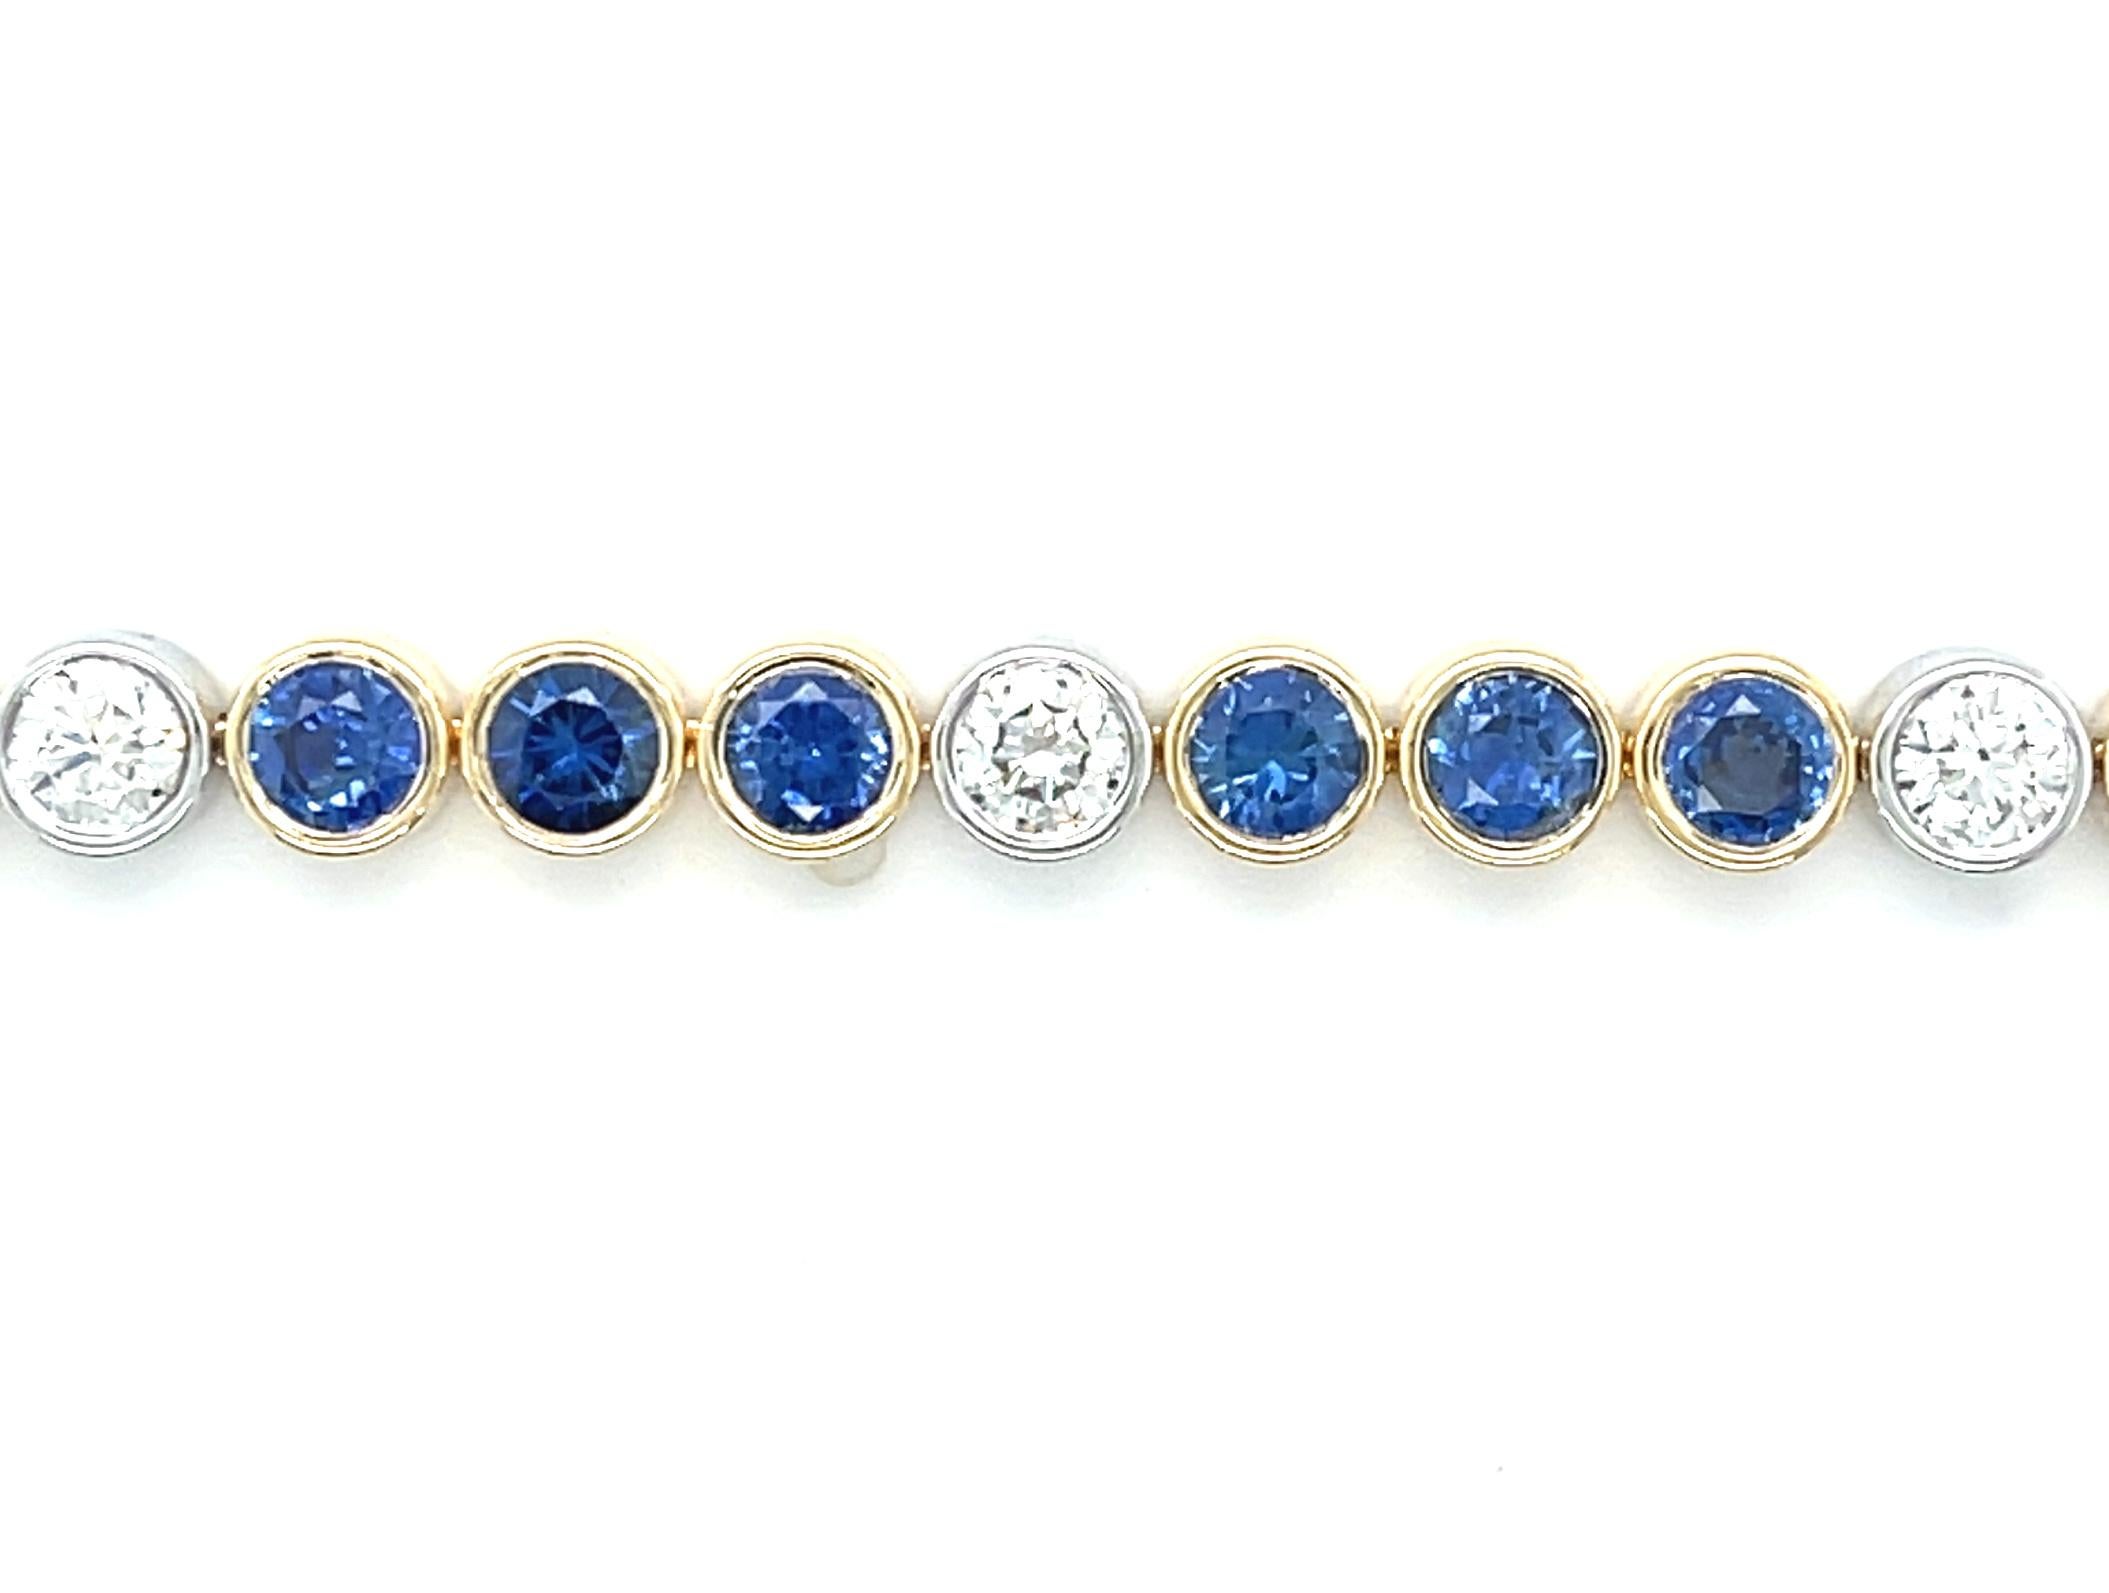  Blue Sapphire and Diamond Tennis Bracelet in 18k Gold, 7.49 Carats Total In New Condition For Sale In Los Angeles, CA